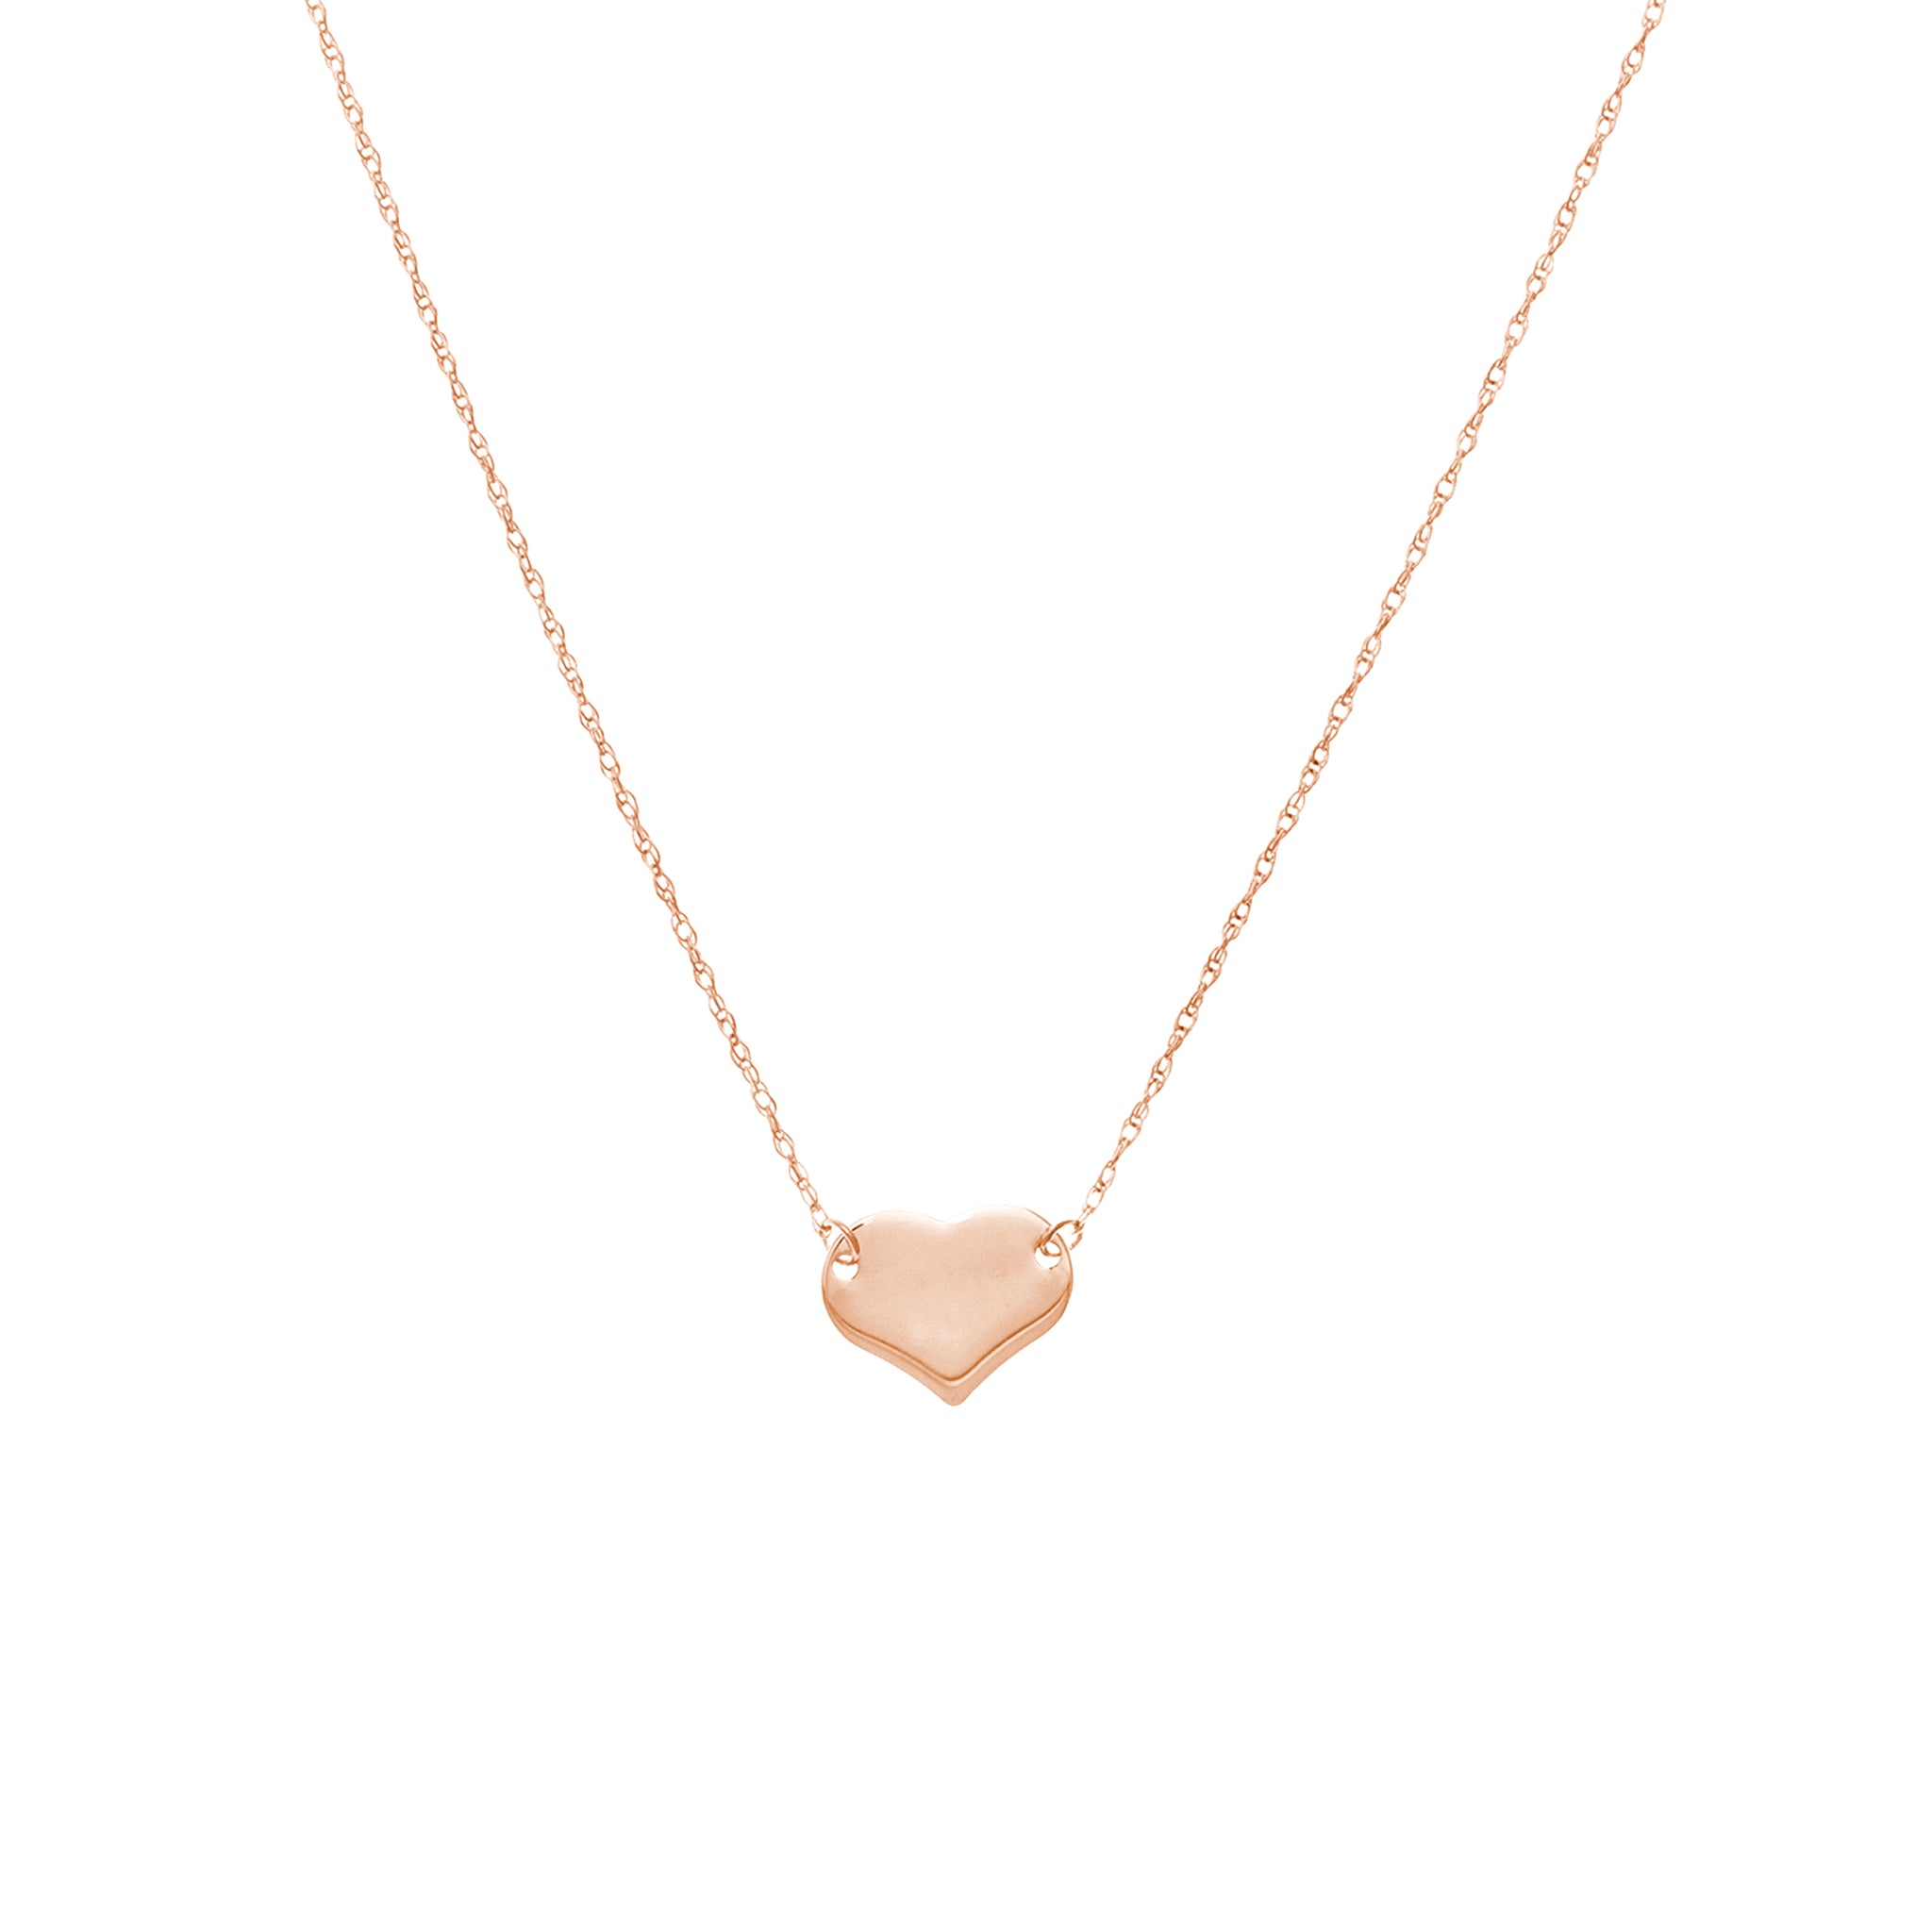 Hemsleys Collection 14K Heart-Shaped Disc Necklace